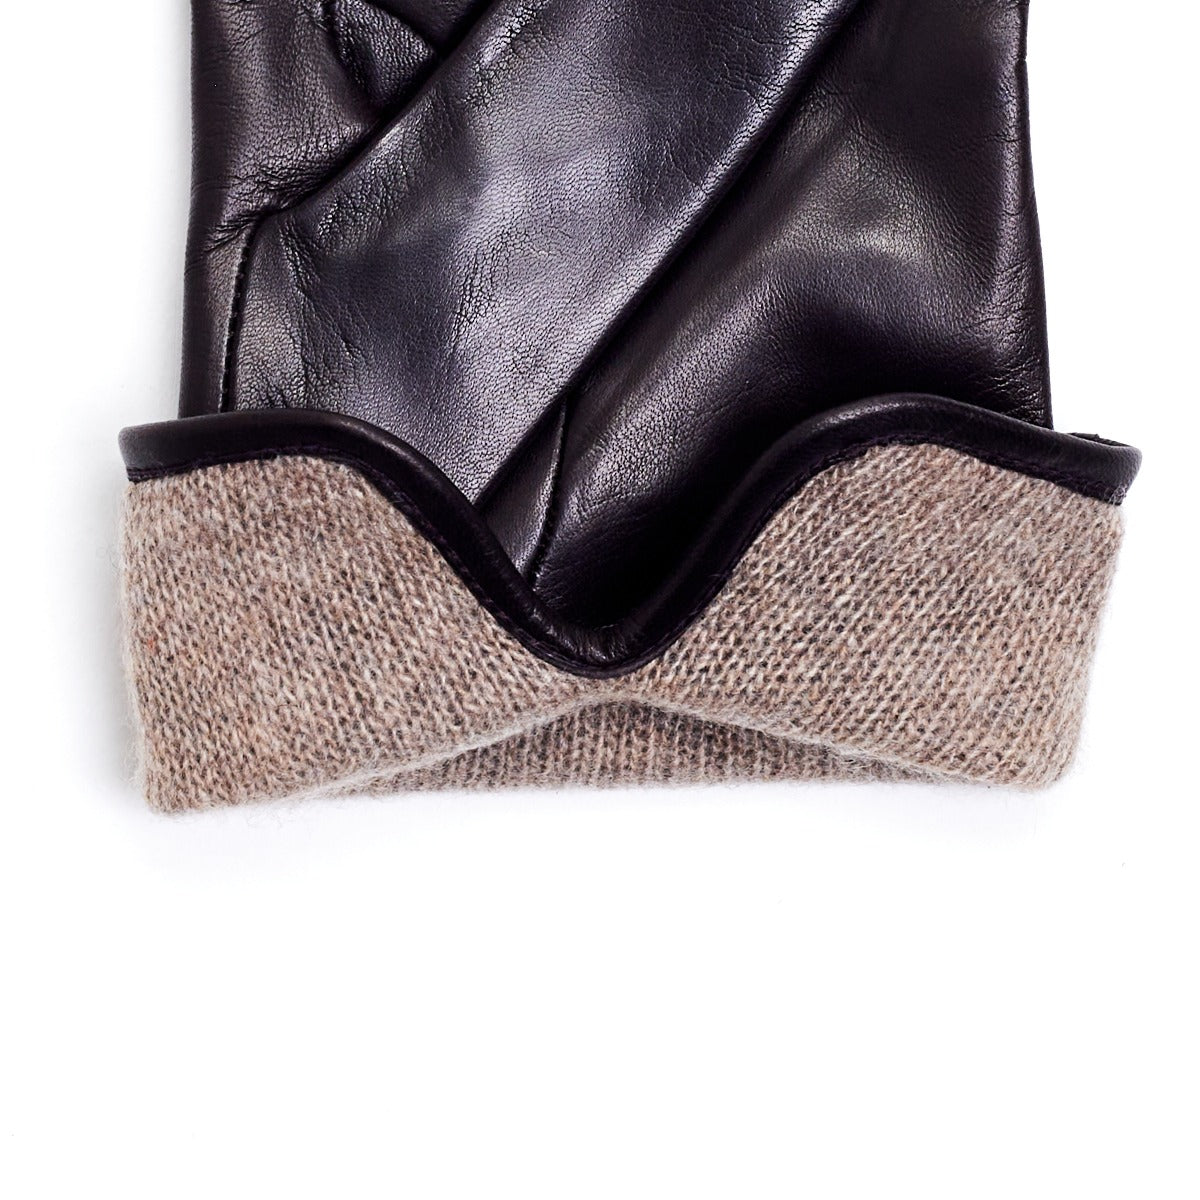 A pair of Sovereign Grade Dark Brown Nappa Leather Gloves, Cashmere Lined by KirbyAllison.com on a white surface.